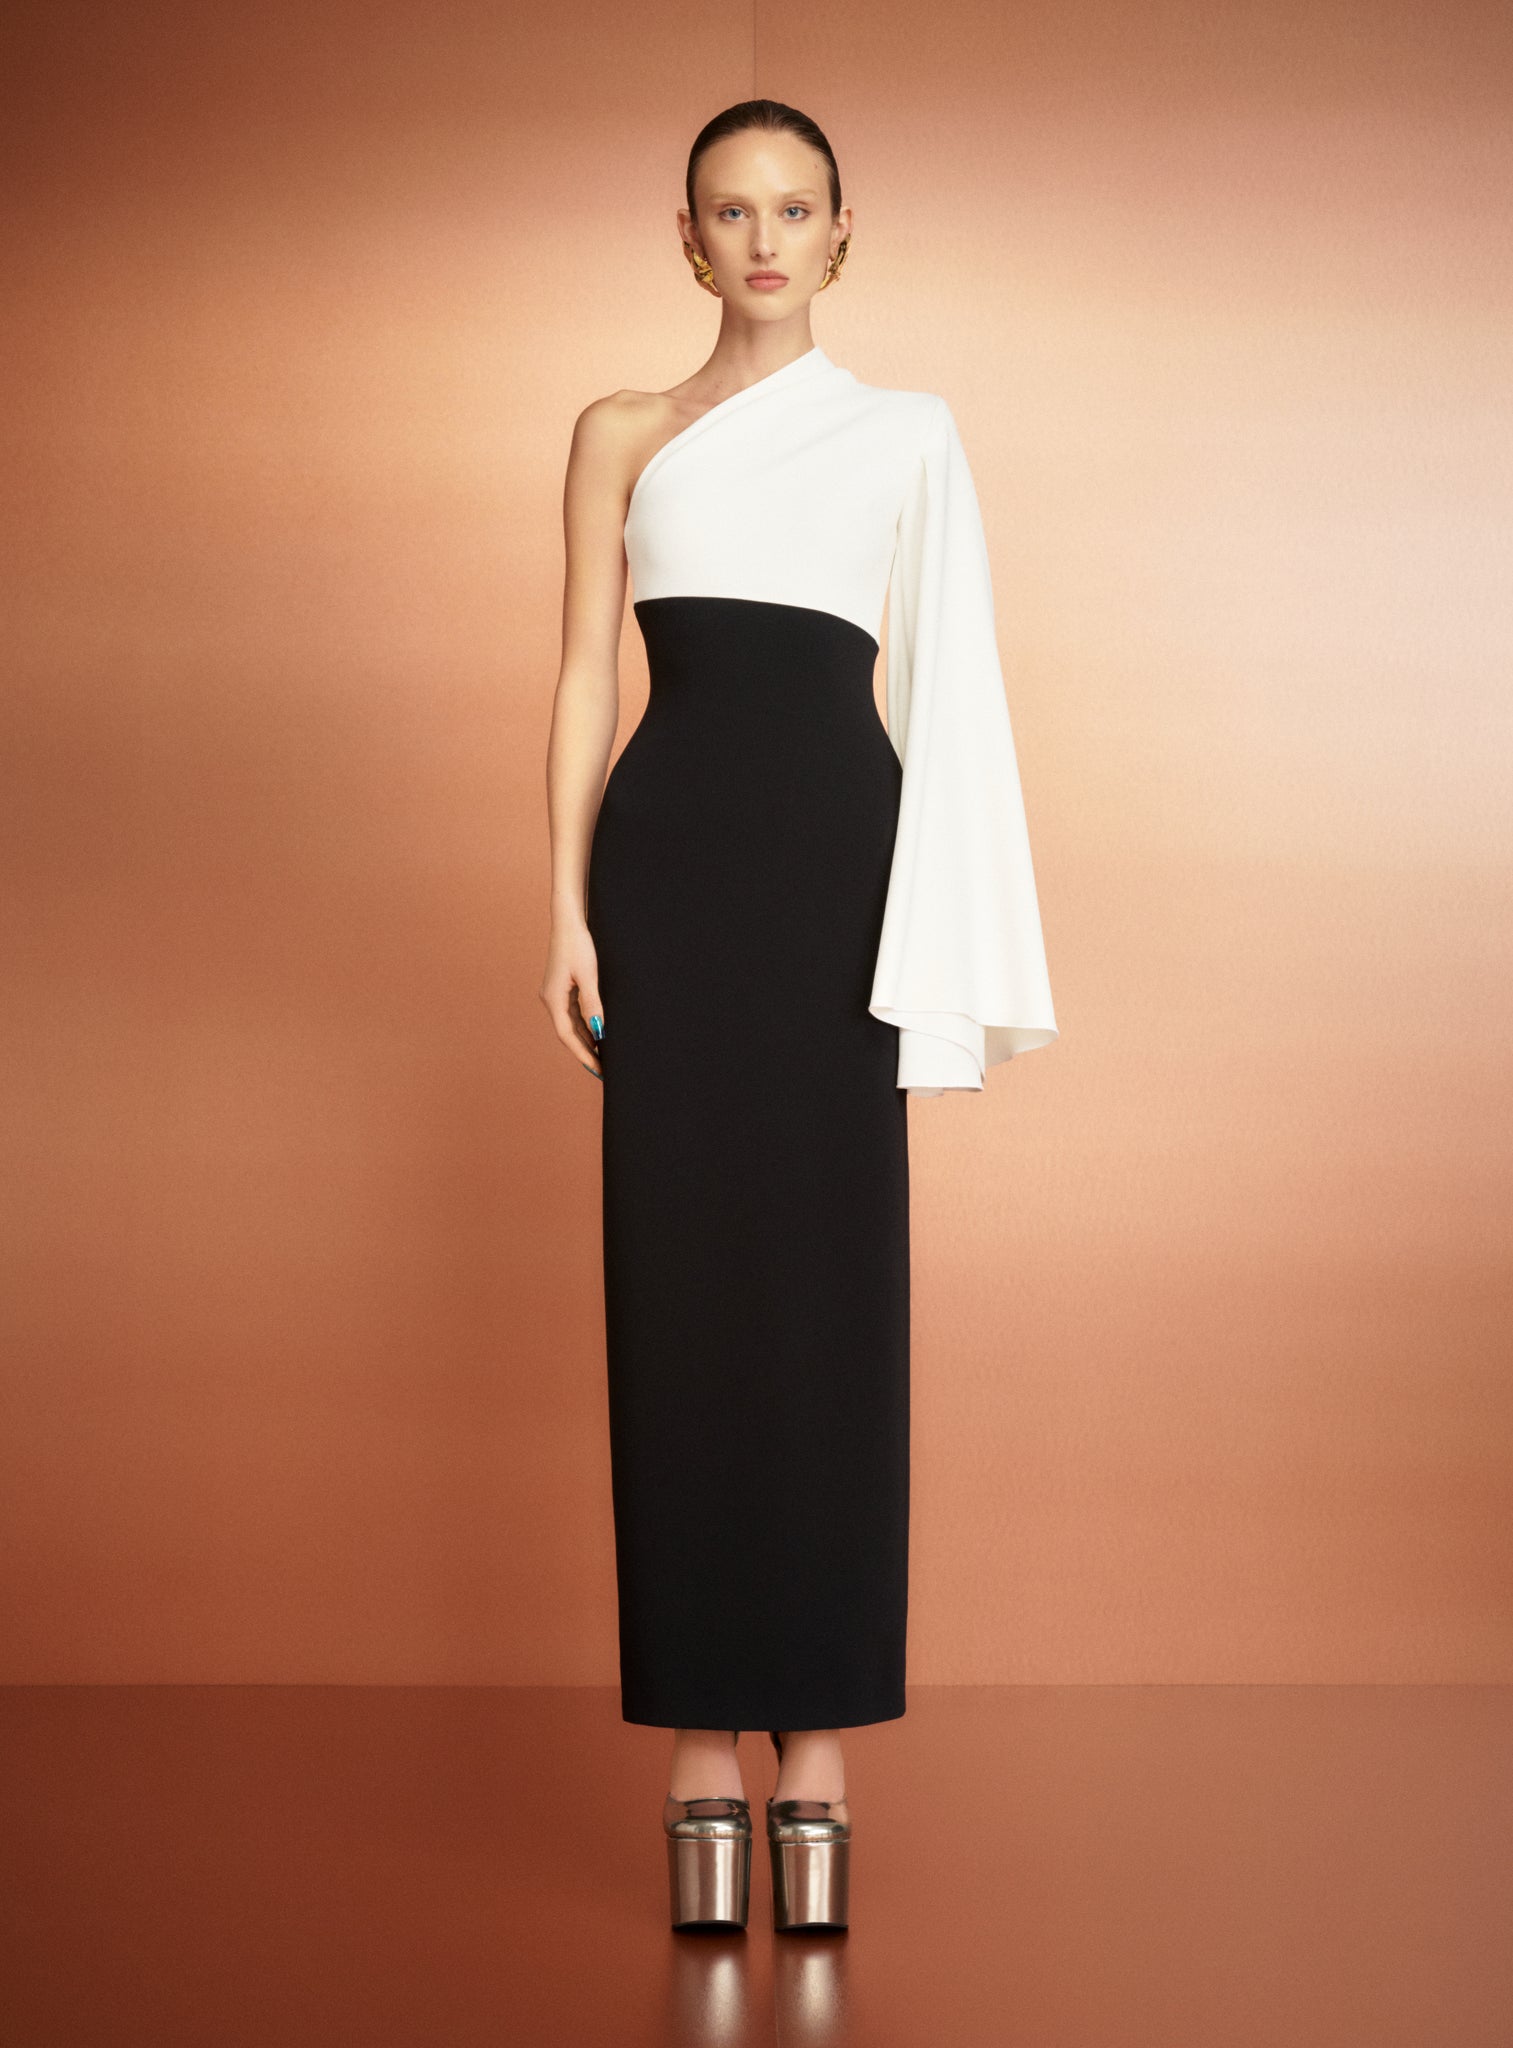 The Elisa Maxi Dress in Cream and Black